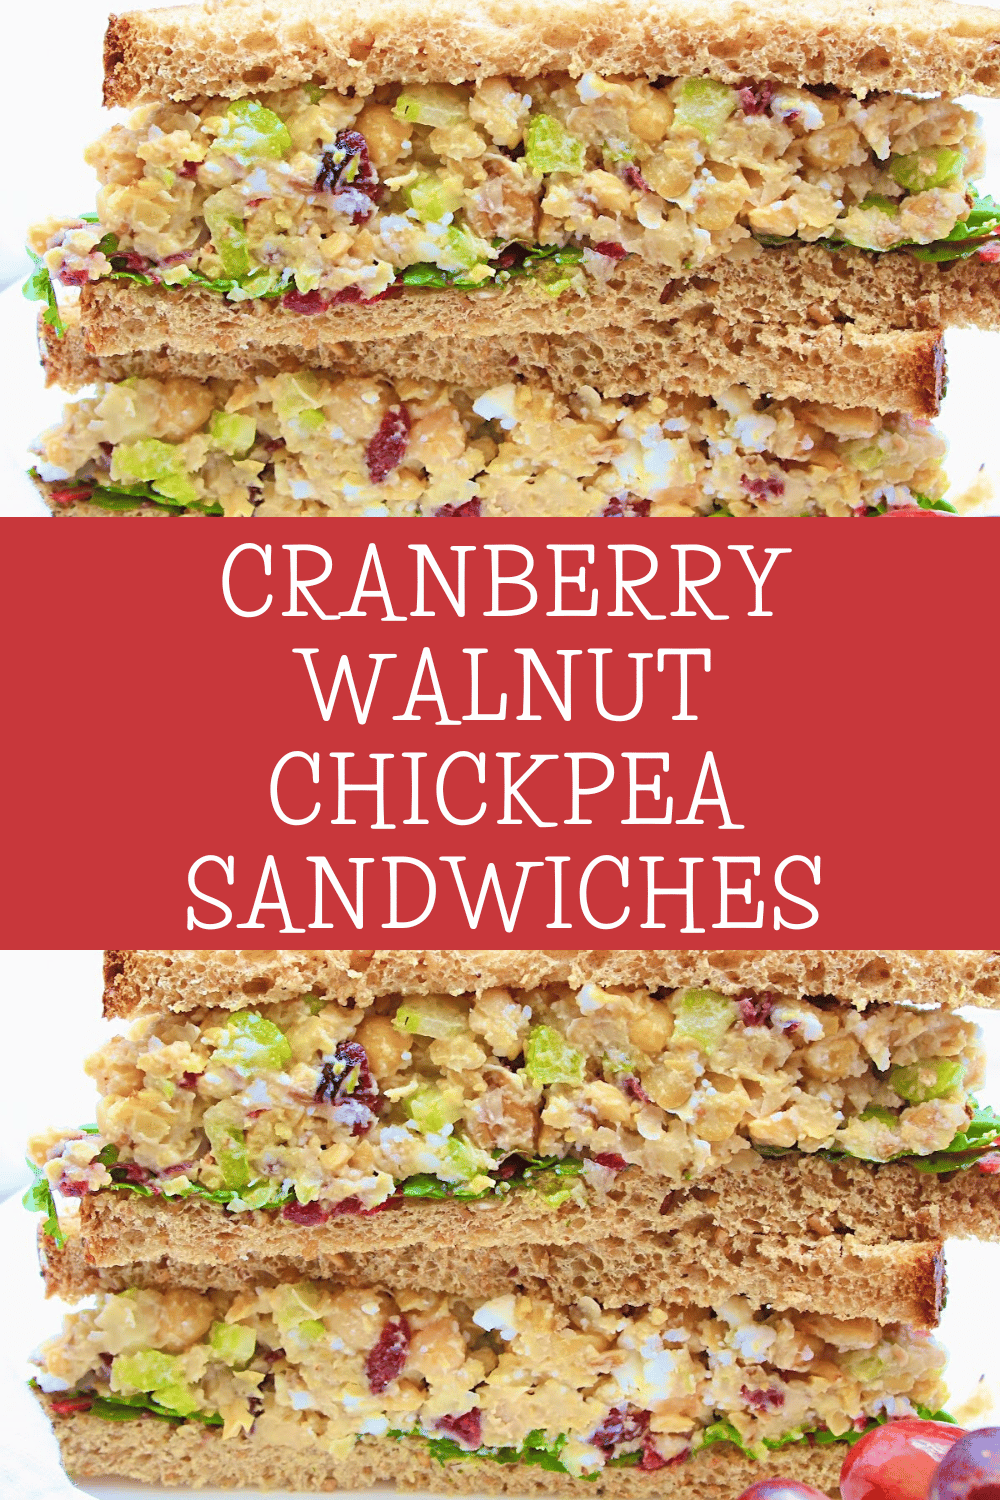 Cranberry Walnut Chickpea Sandwiches ~ This quick and healthy lunch is perfect for meal prep or packed lunches on the go!  via @thiswifecooks